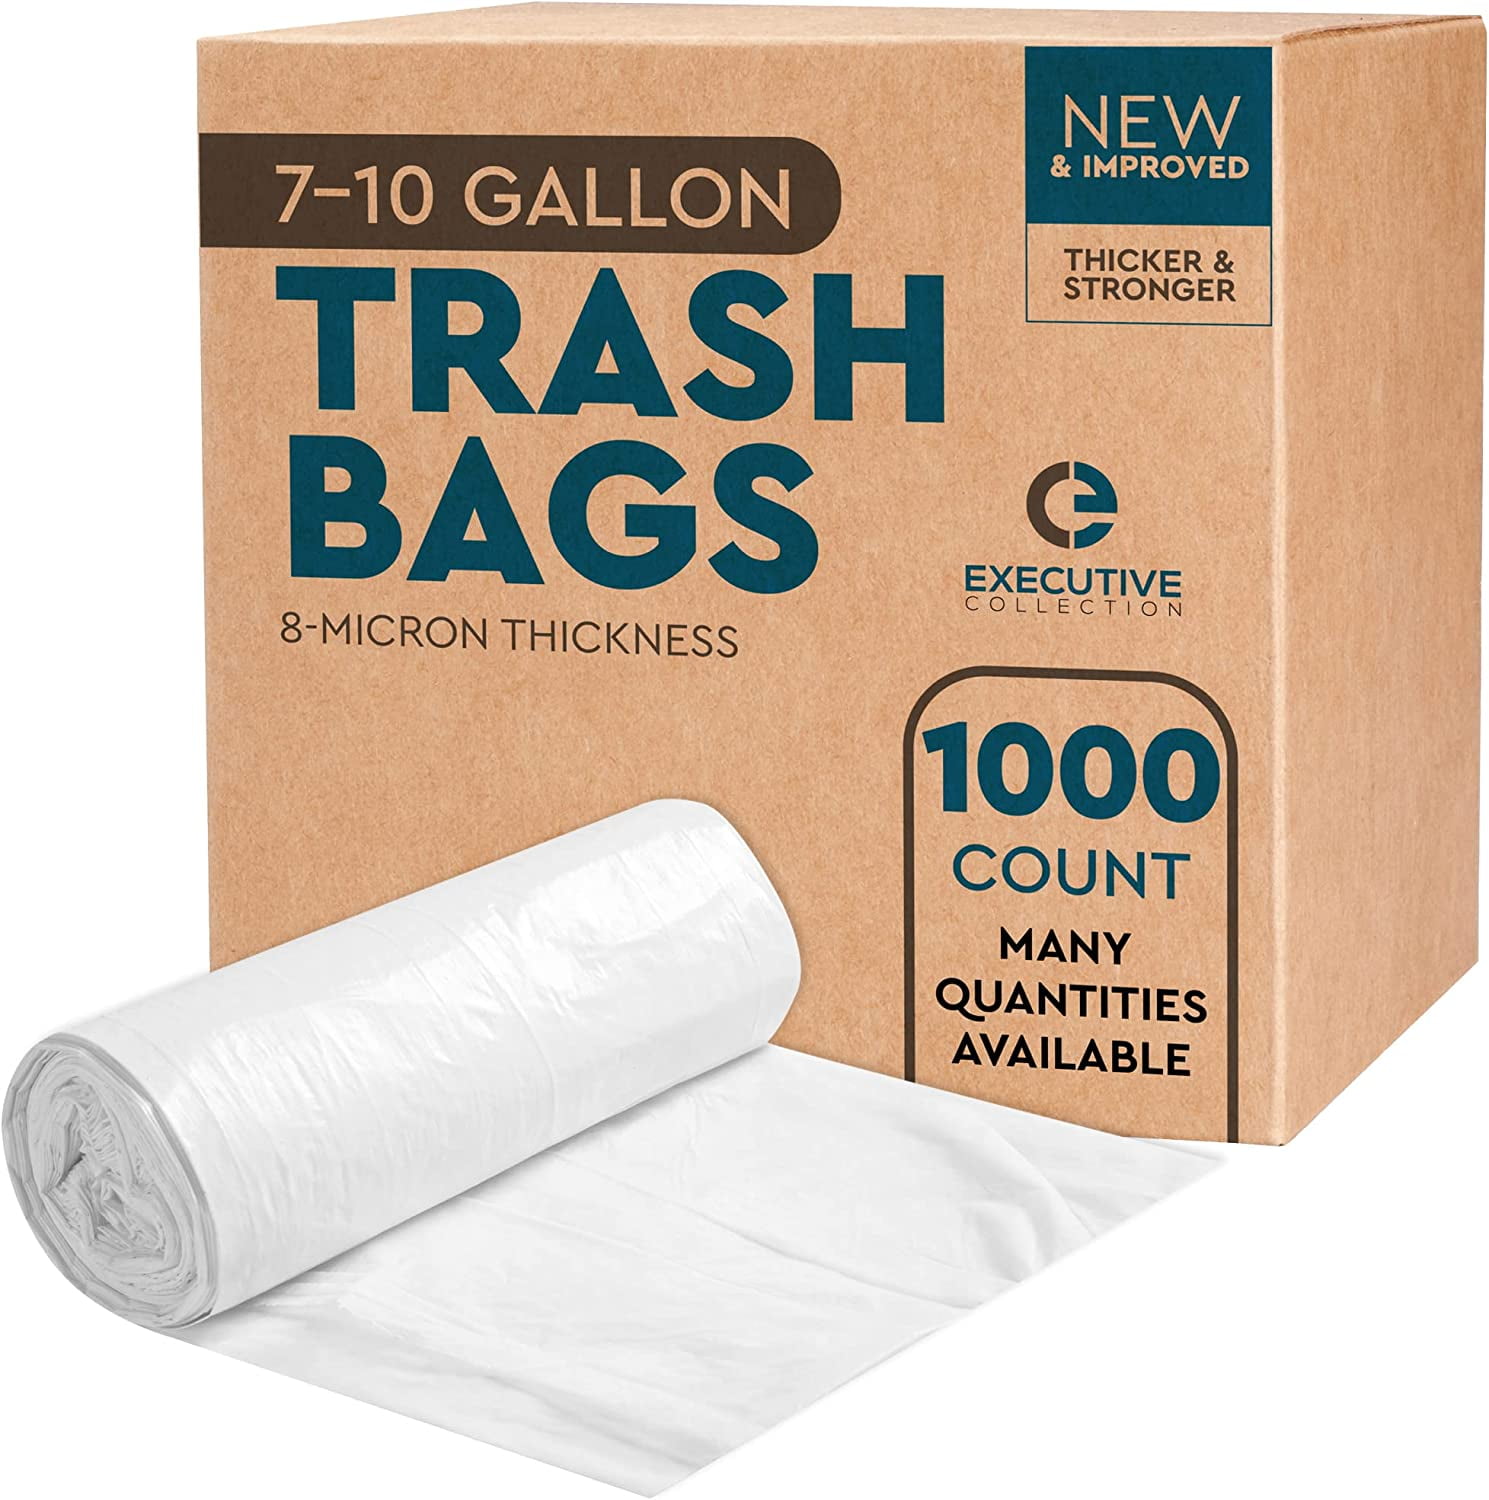 Wholesale Trash bags, Paper Bags and Can Liners